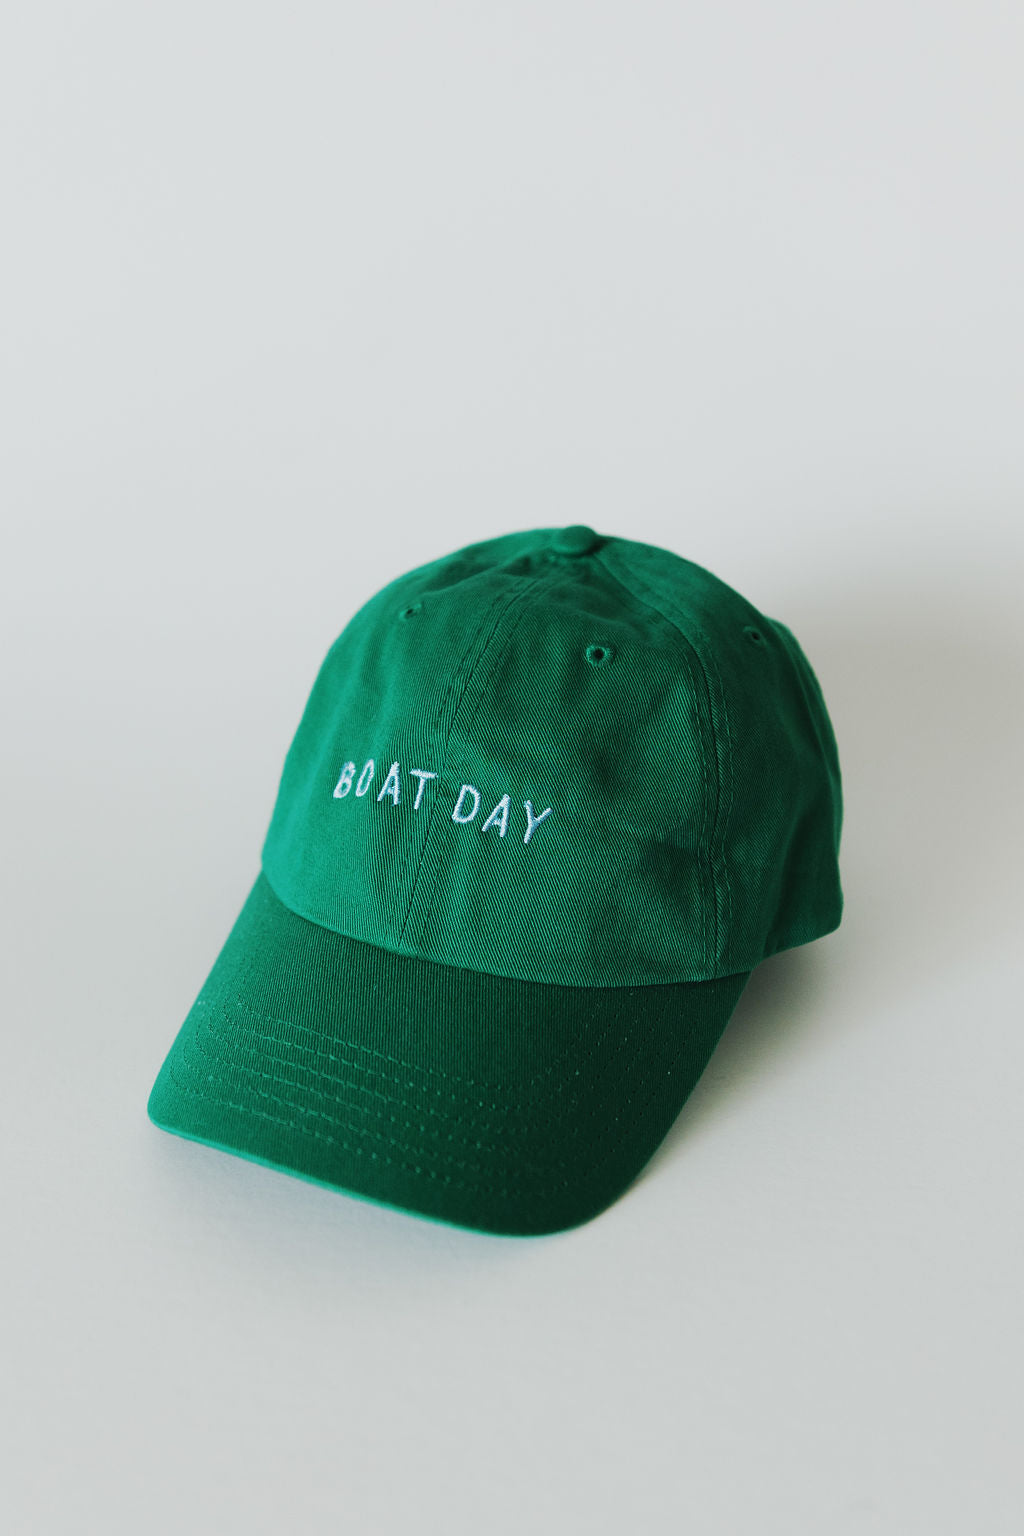 BOAT DAY HAT